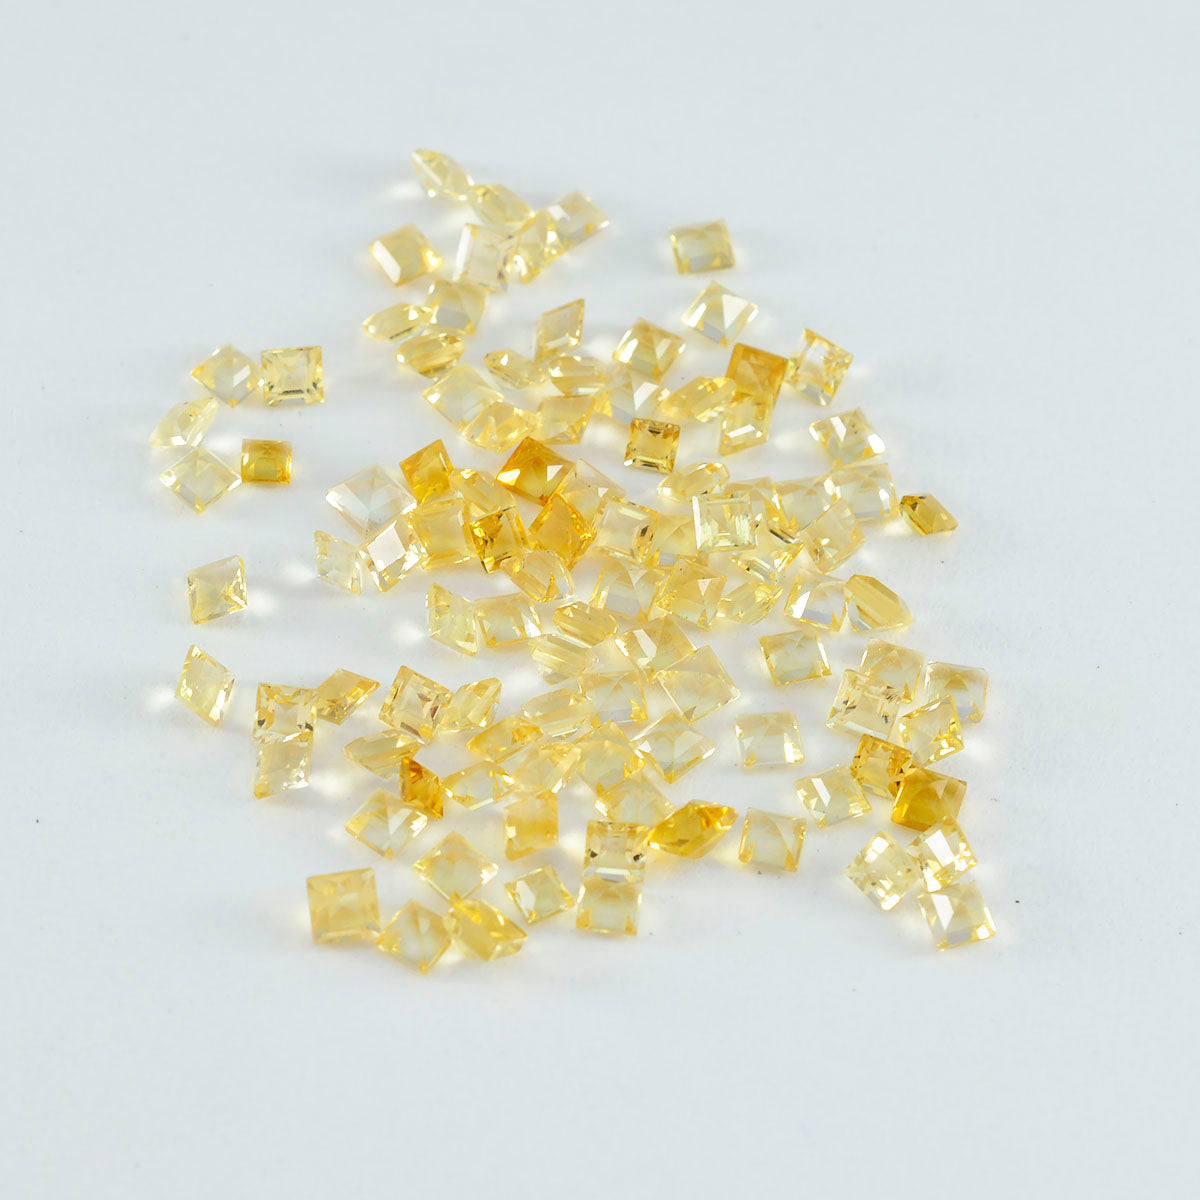 Riyogems 1PC Real Yellow Citrine Faceted 4x4 mm Square Shape Nice Quality Gems